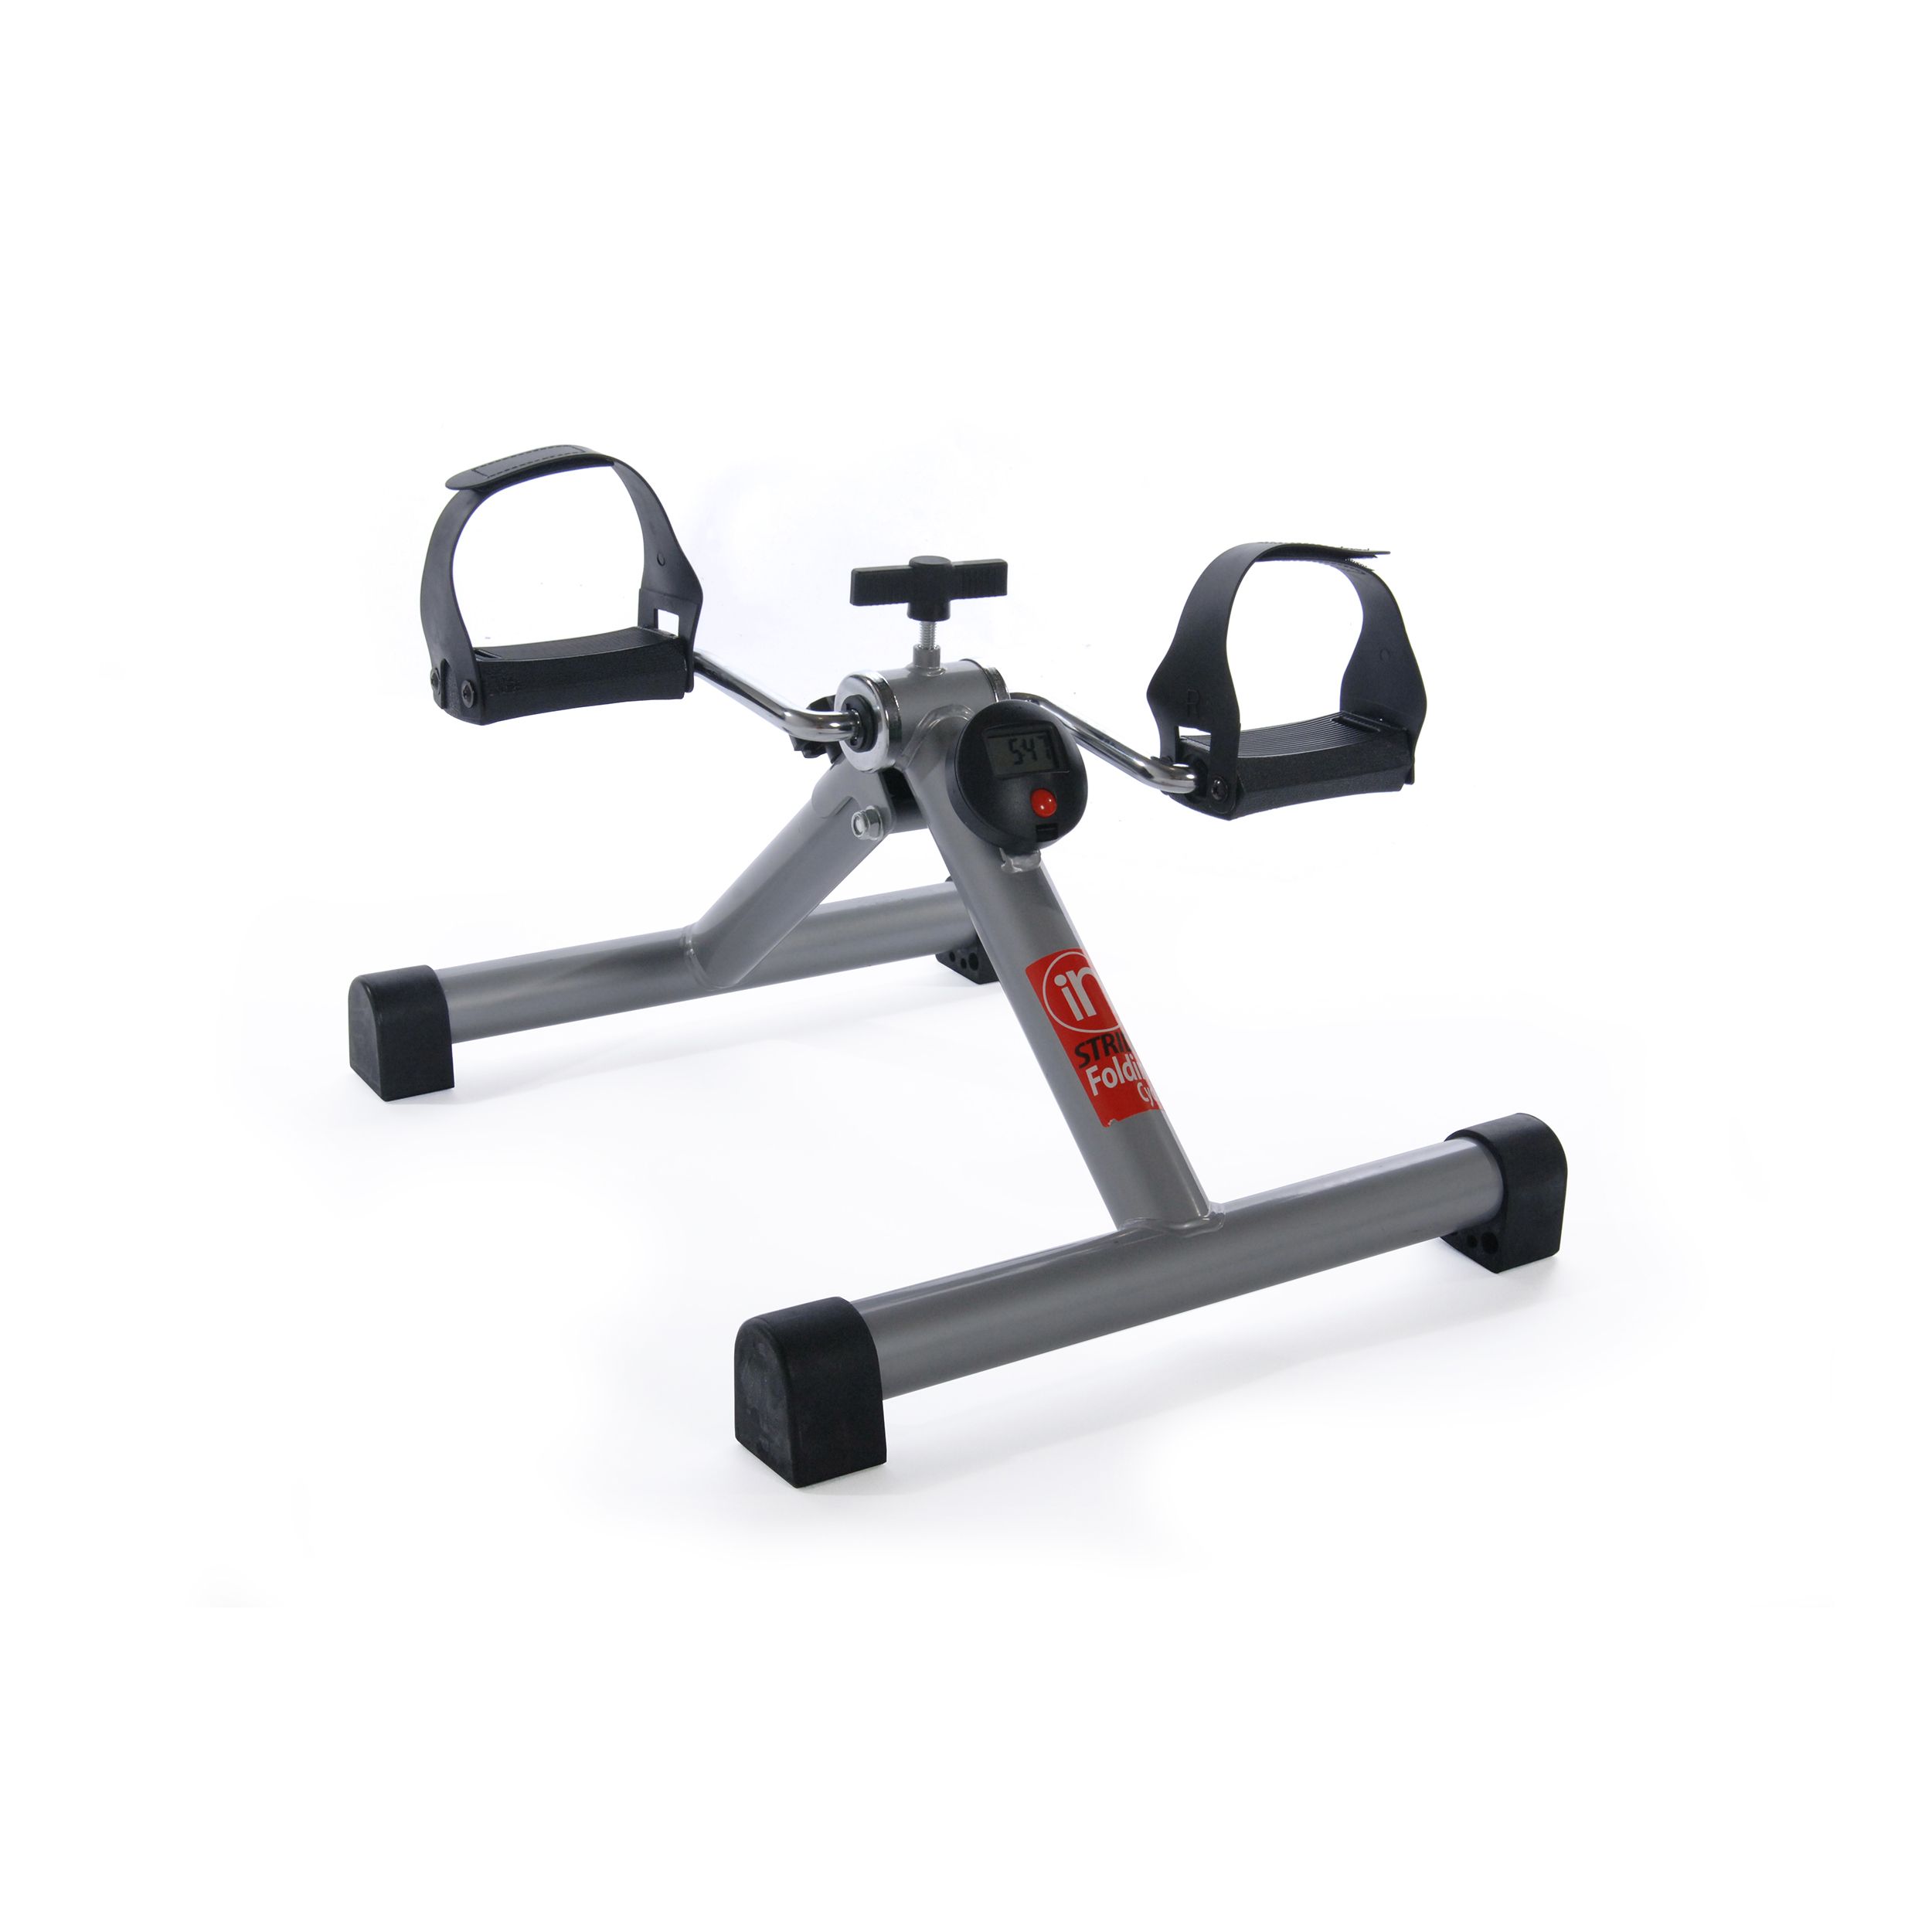 Stamina Products InStride Portable Folding Cycle for Cardio Strength Workouts 